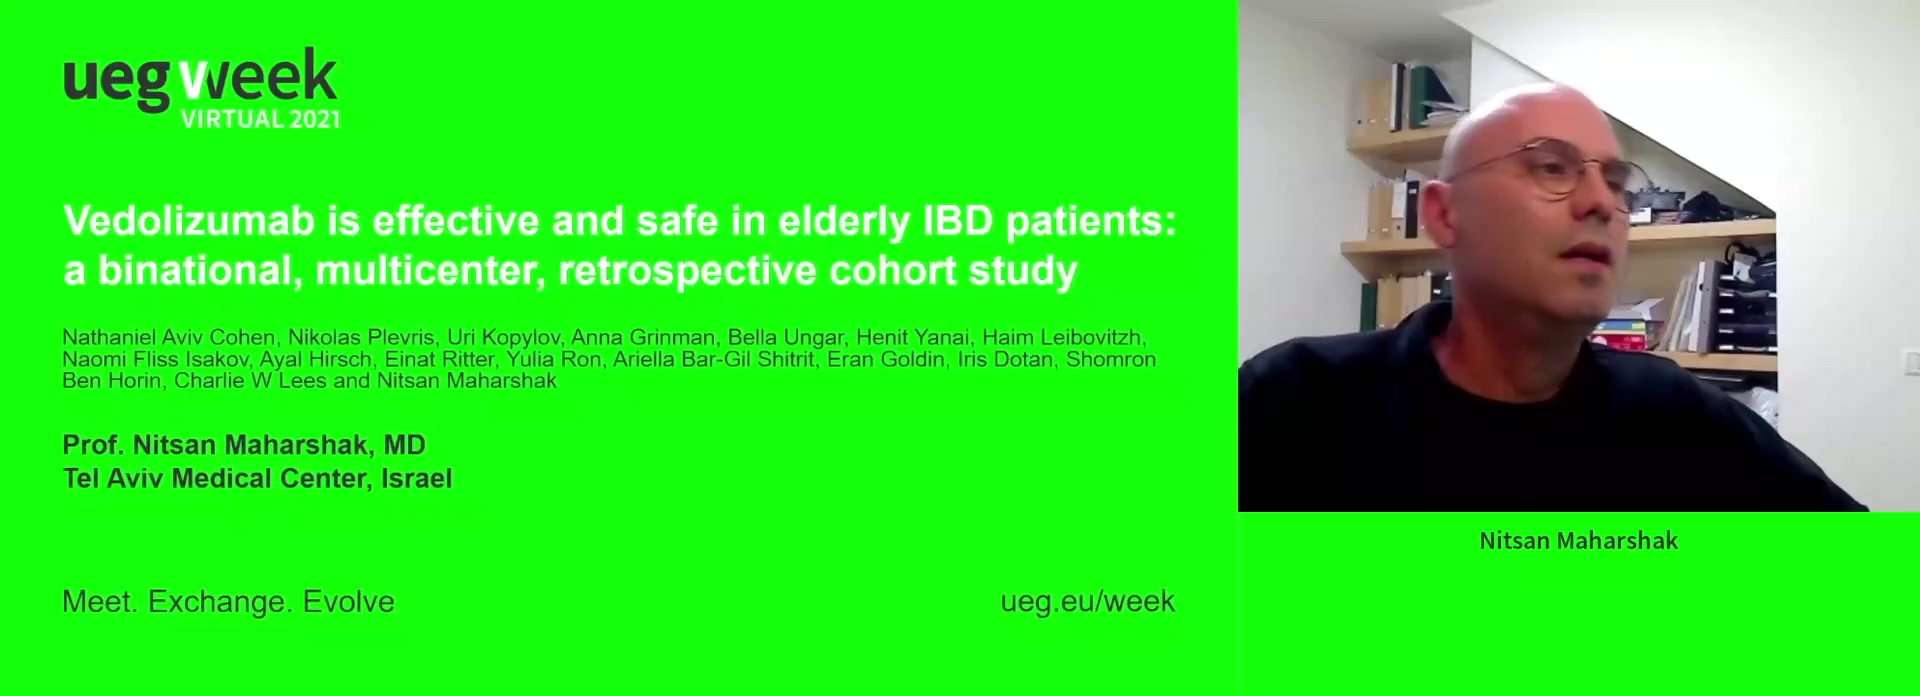 Vedolizumab is effective and safe in elderly inflammatory bowel disease patients: a binational, multicenter, retrospective cohort study